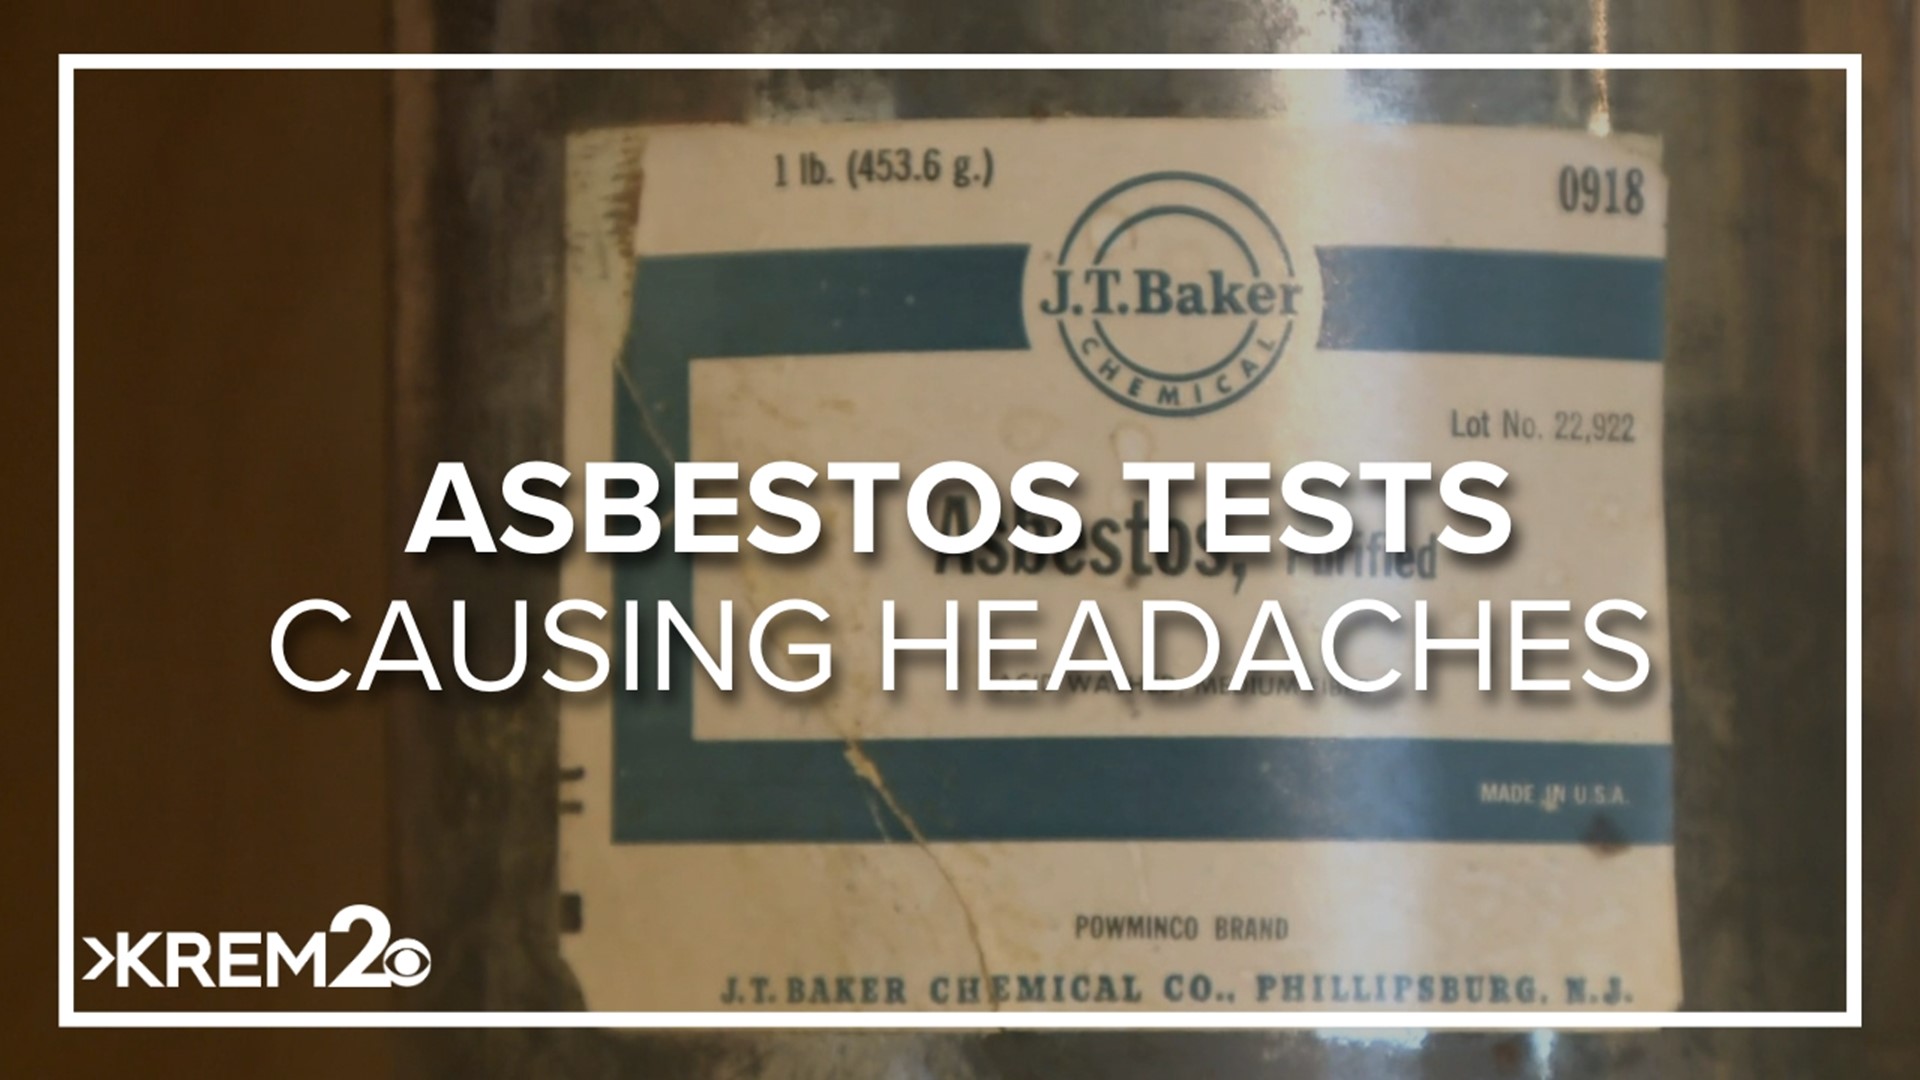 Those affected by the fires are said to be spending between $200-$2,000 plus for asbestos testing.